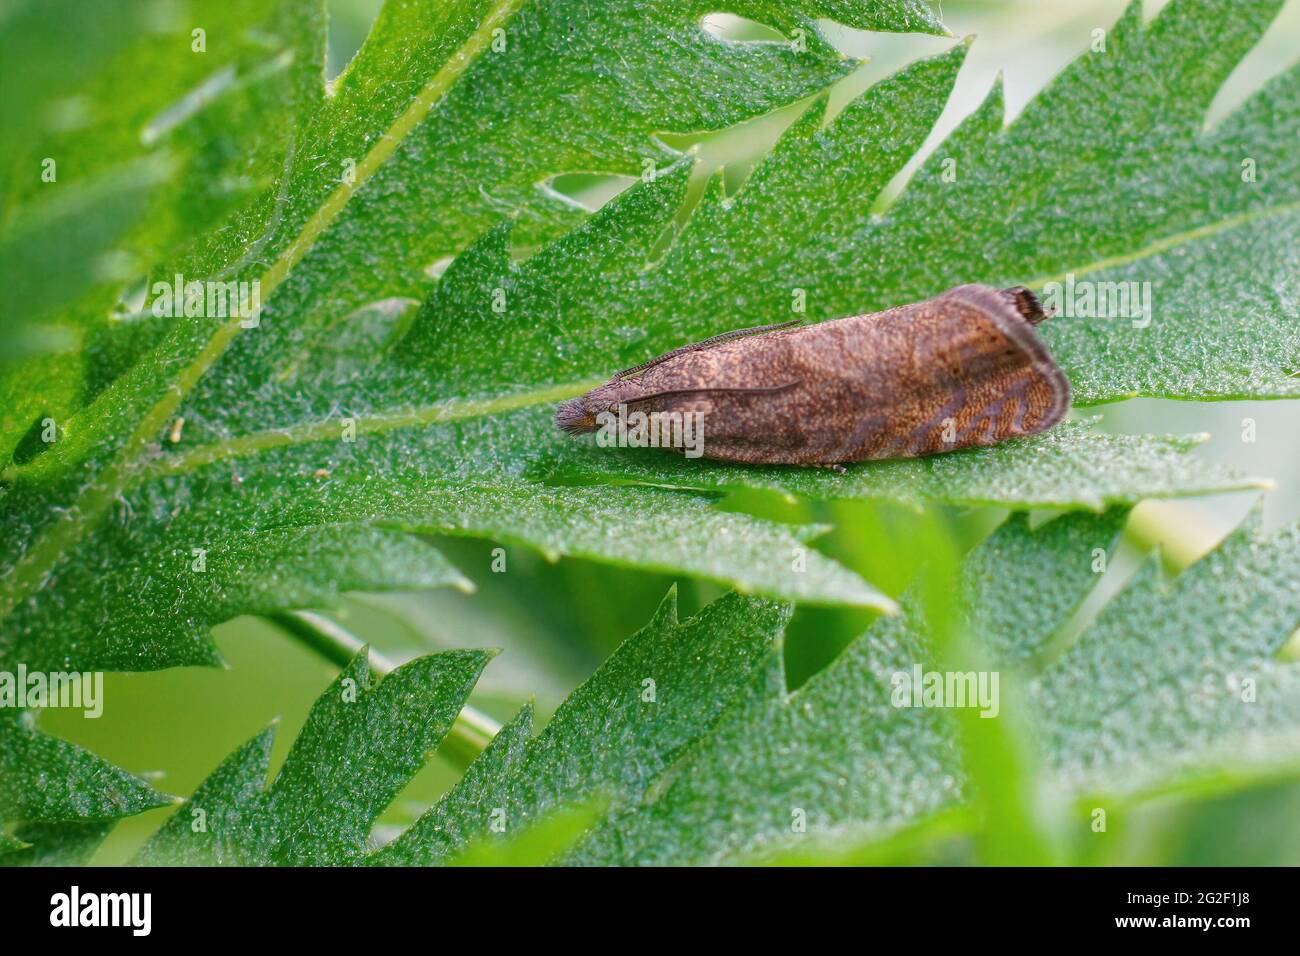 Closeup of a small tortricid moth, Dichrorampha, hiding among the feathery leaves Stock Photo